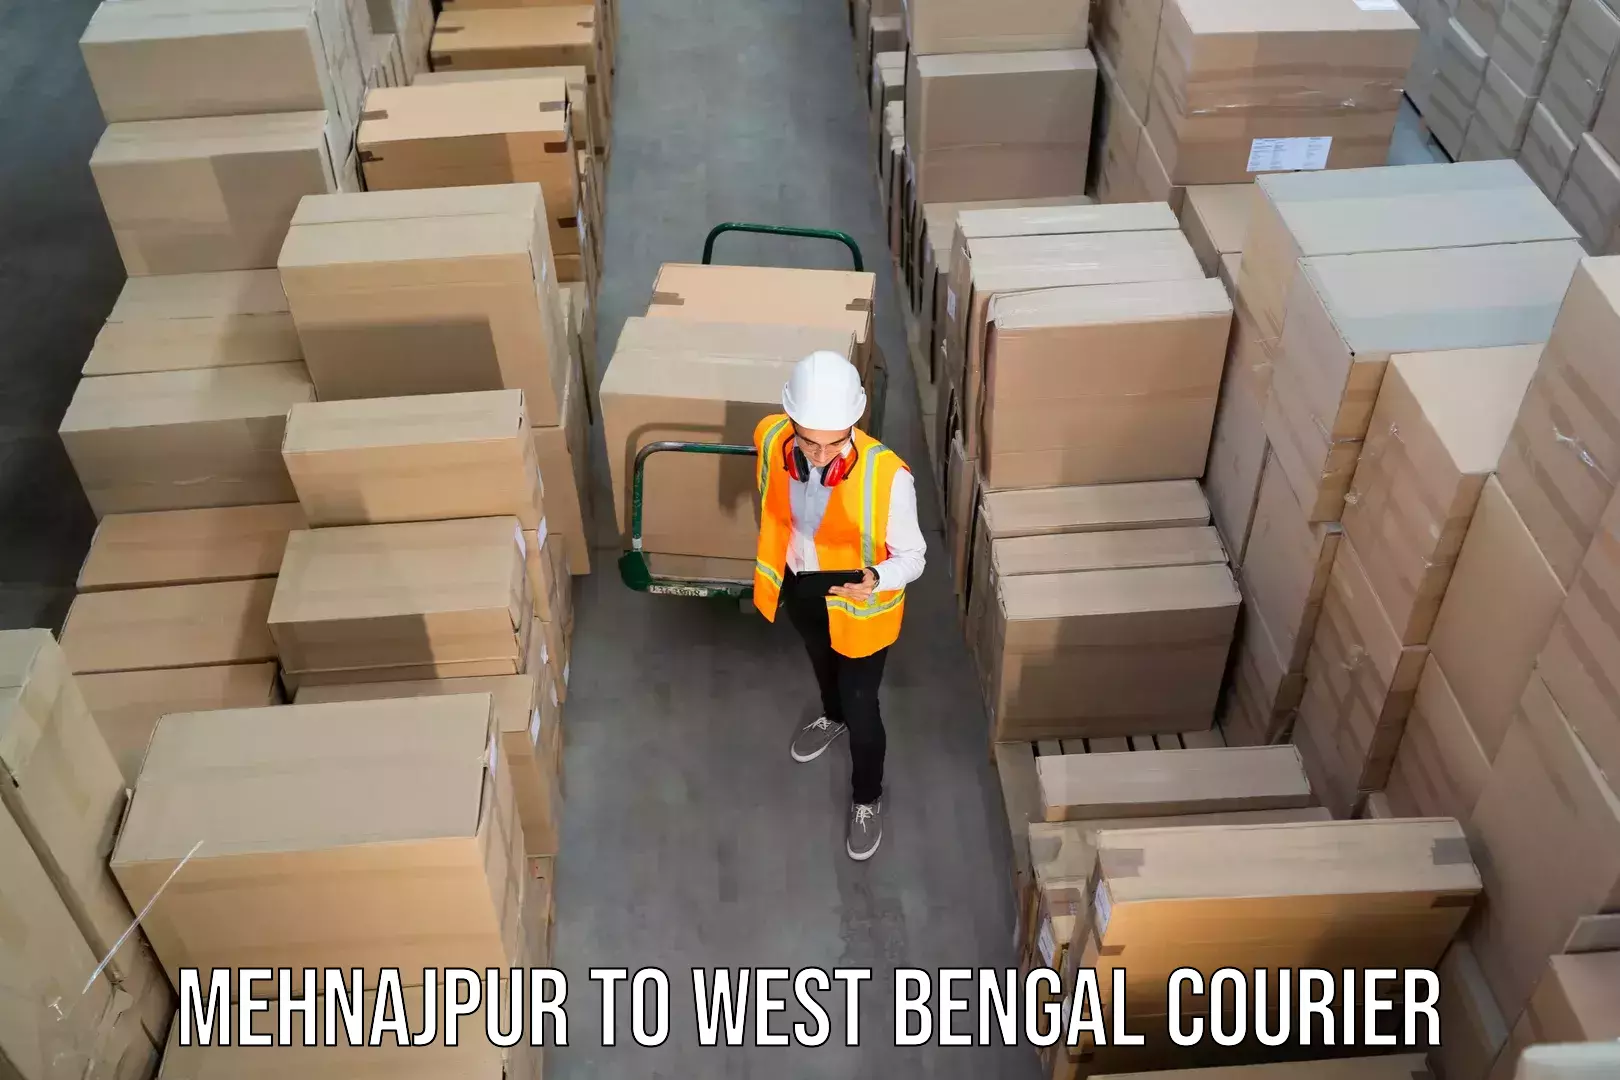 Round-the-clock parcel delivery Mehnajpur to Bhagabati